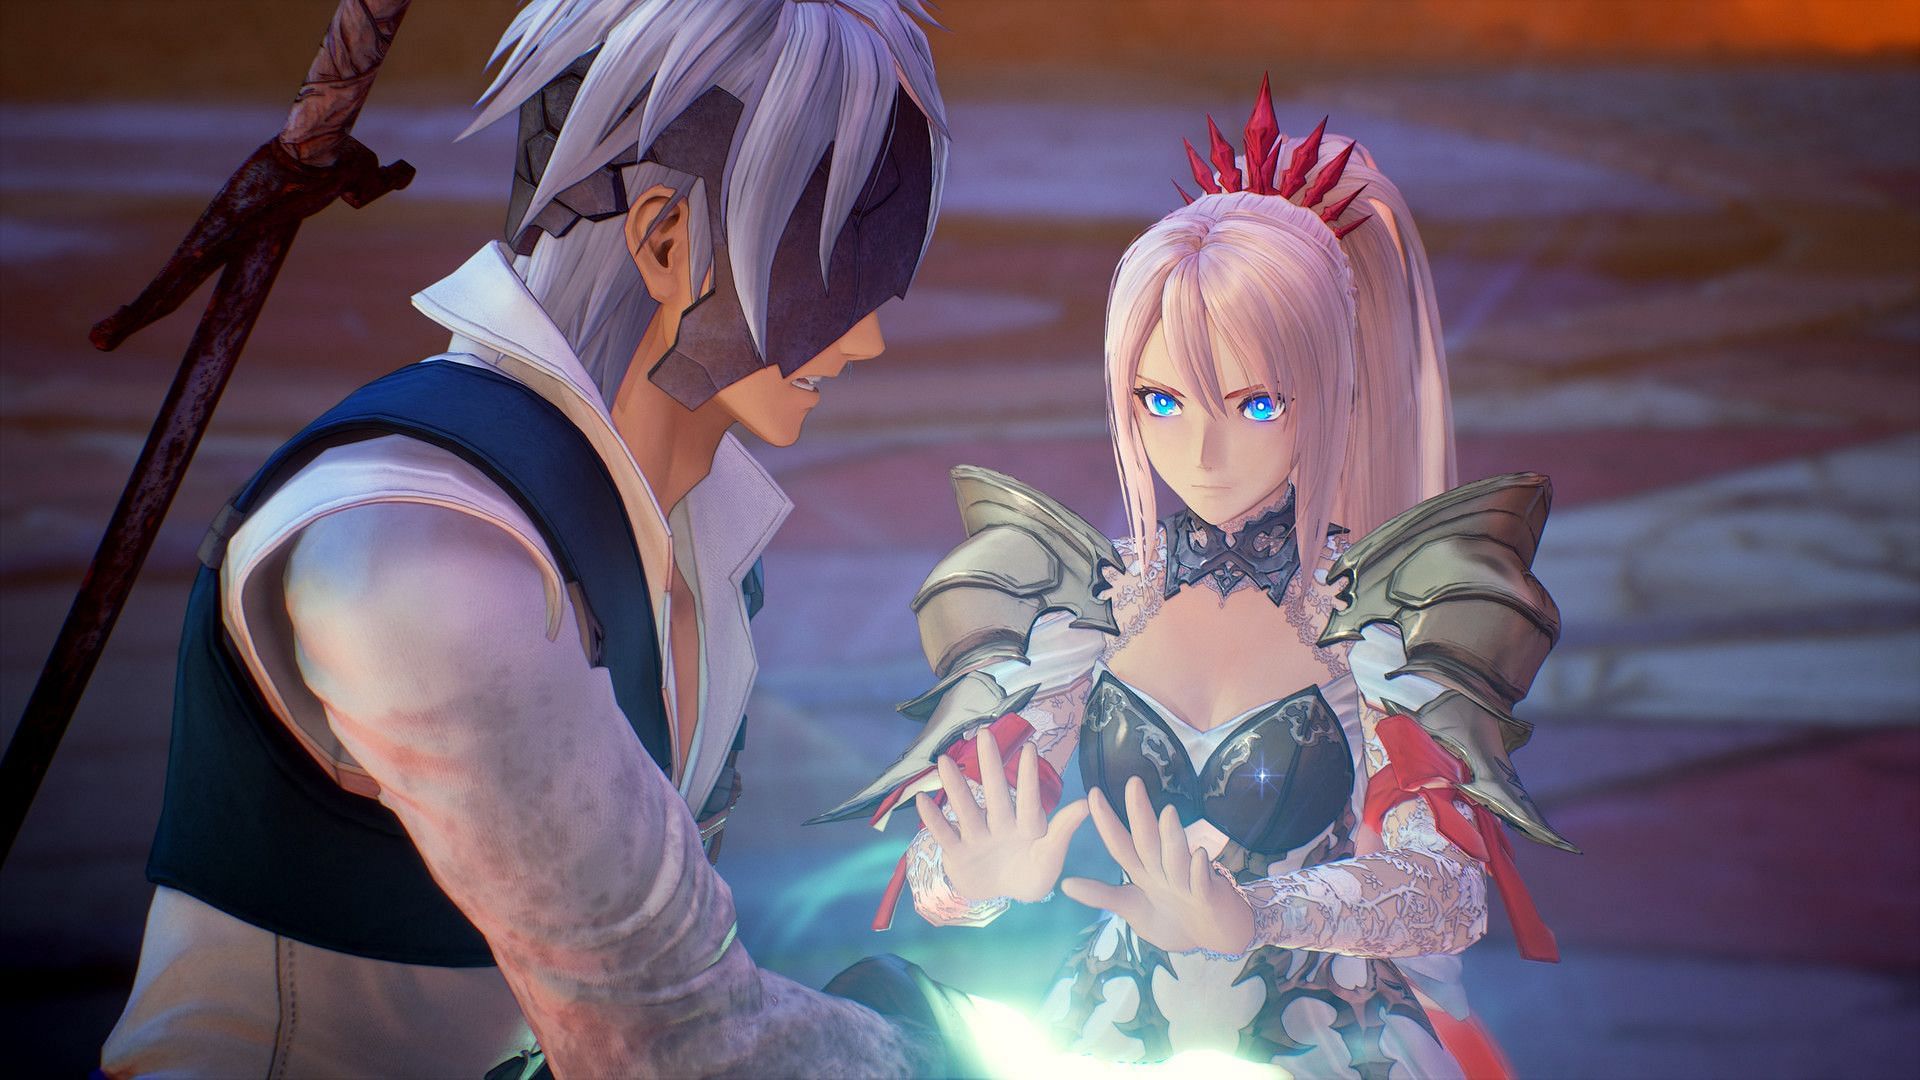 Tales of Arise was voted best RPG game by Game Awards in 2021 (Image via Bandai Namco)